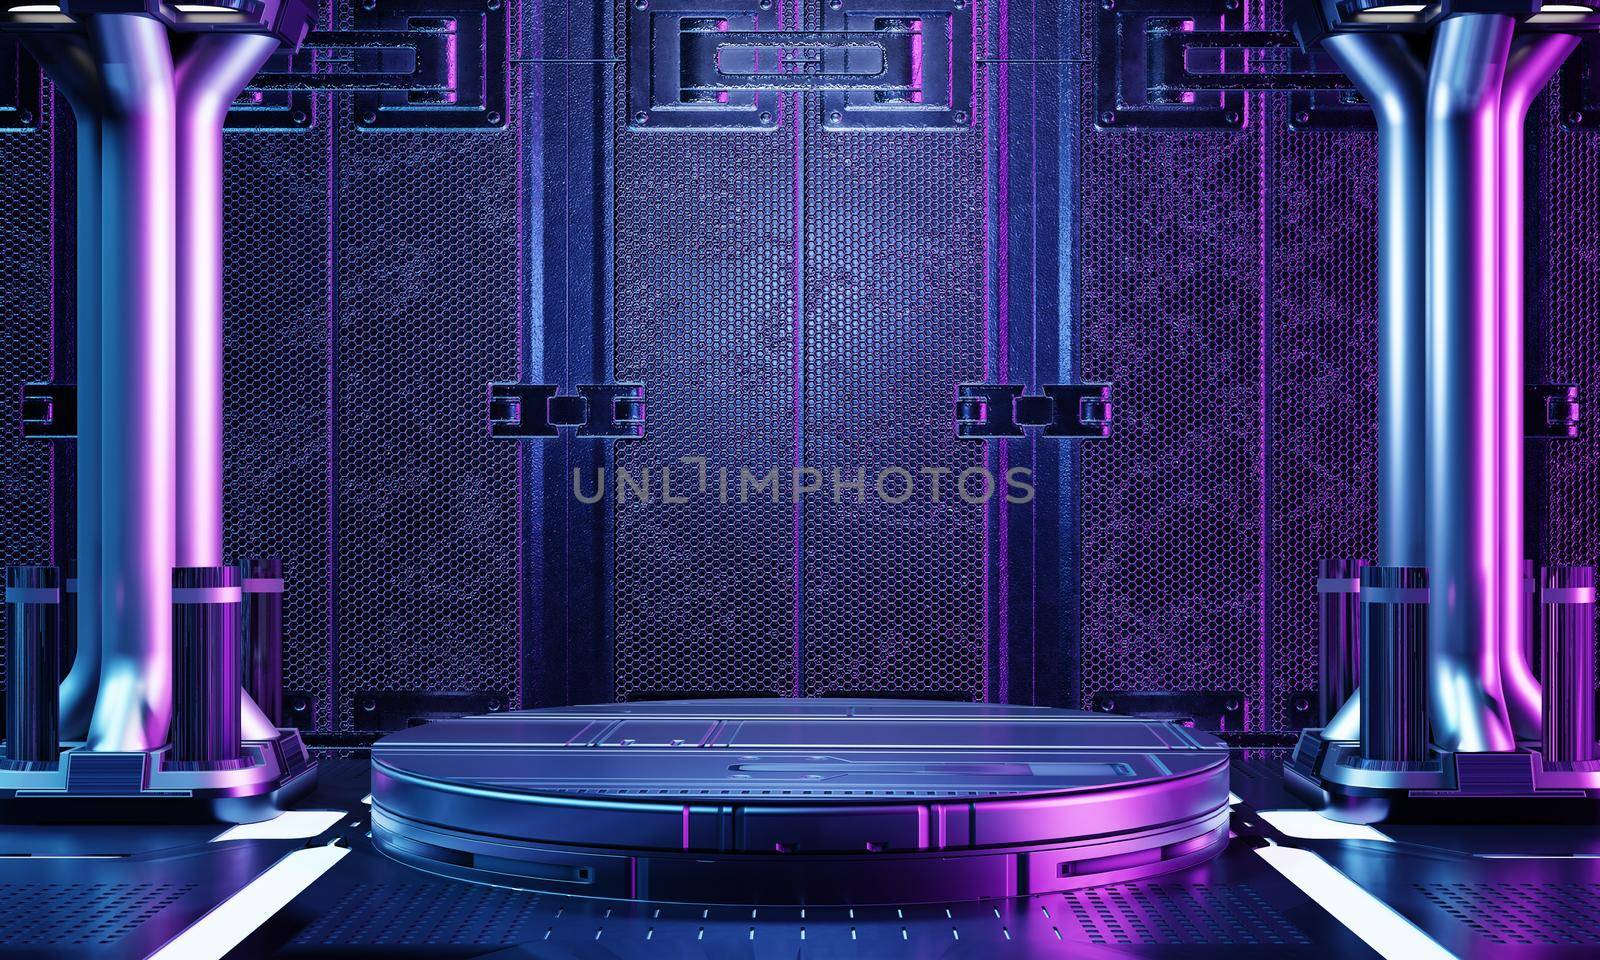 Cyberpunk sci-fi product podium interior showcase in spaceship base with blue and pink background. Technology and object concept. 3D illustration rendering